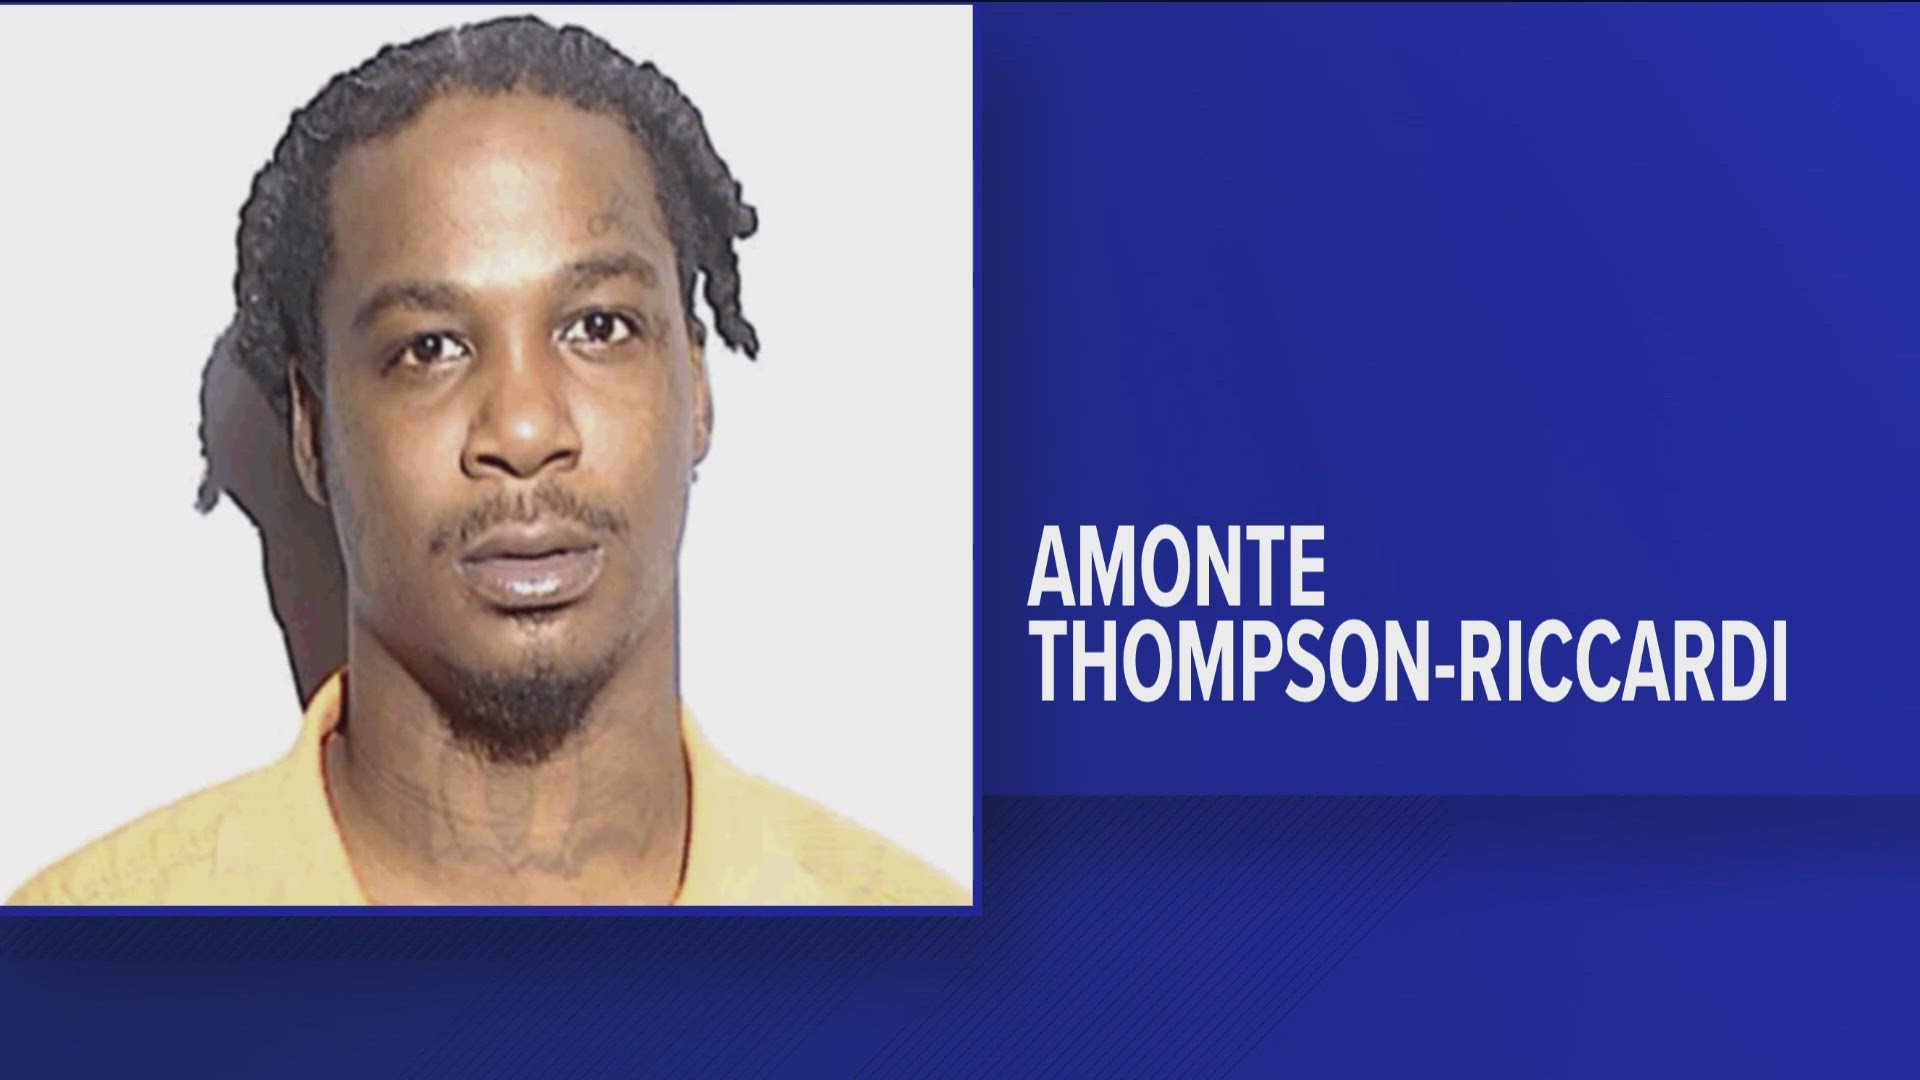 Police arrested Amonte Thompson-Riccardi after he allegedly had a gun in his possession while in a high school parking lot during a football game.